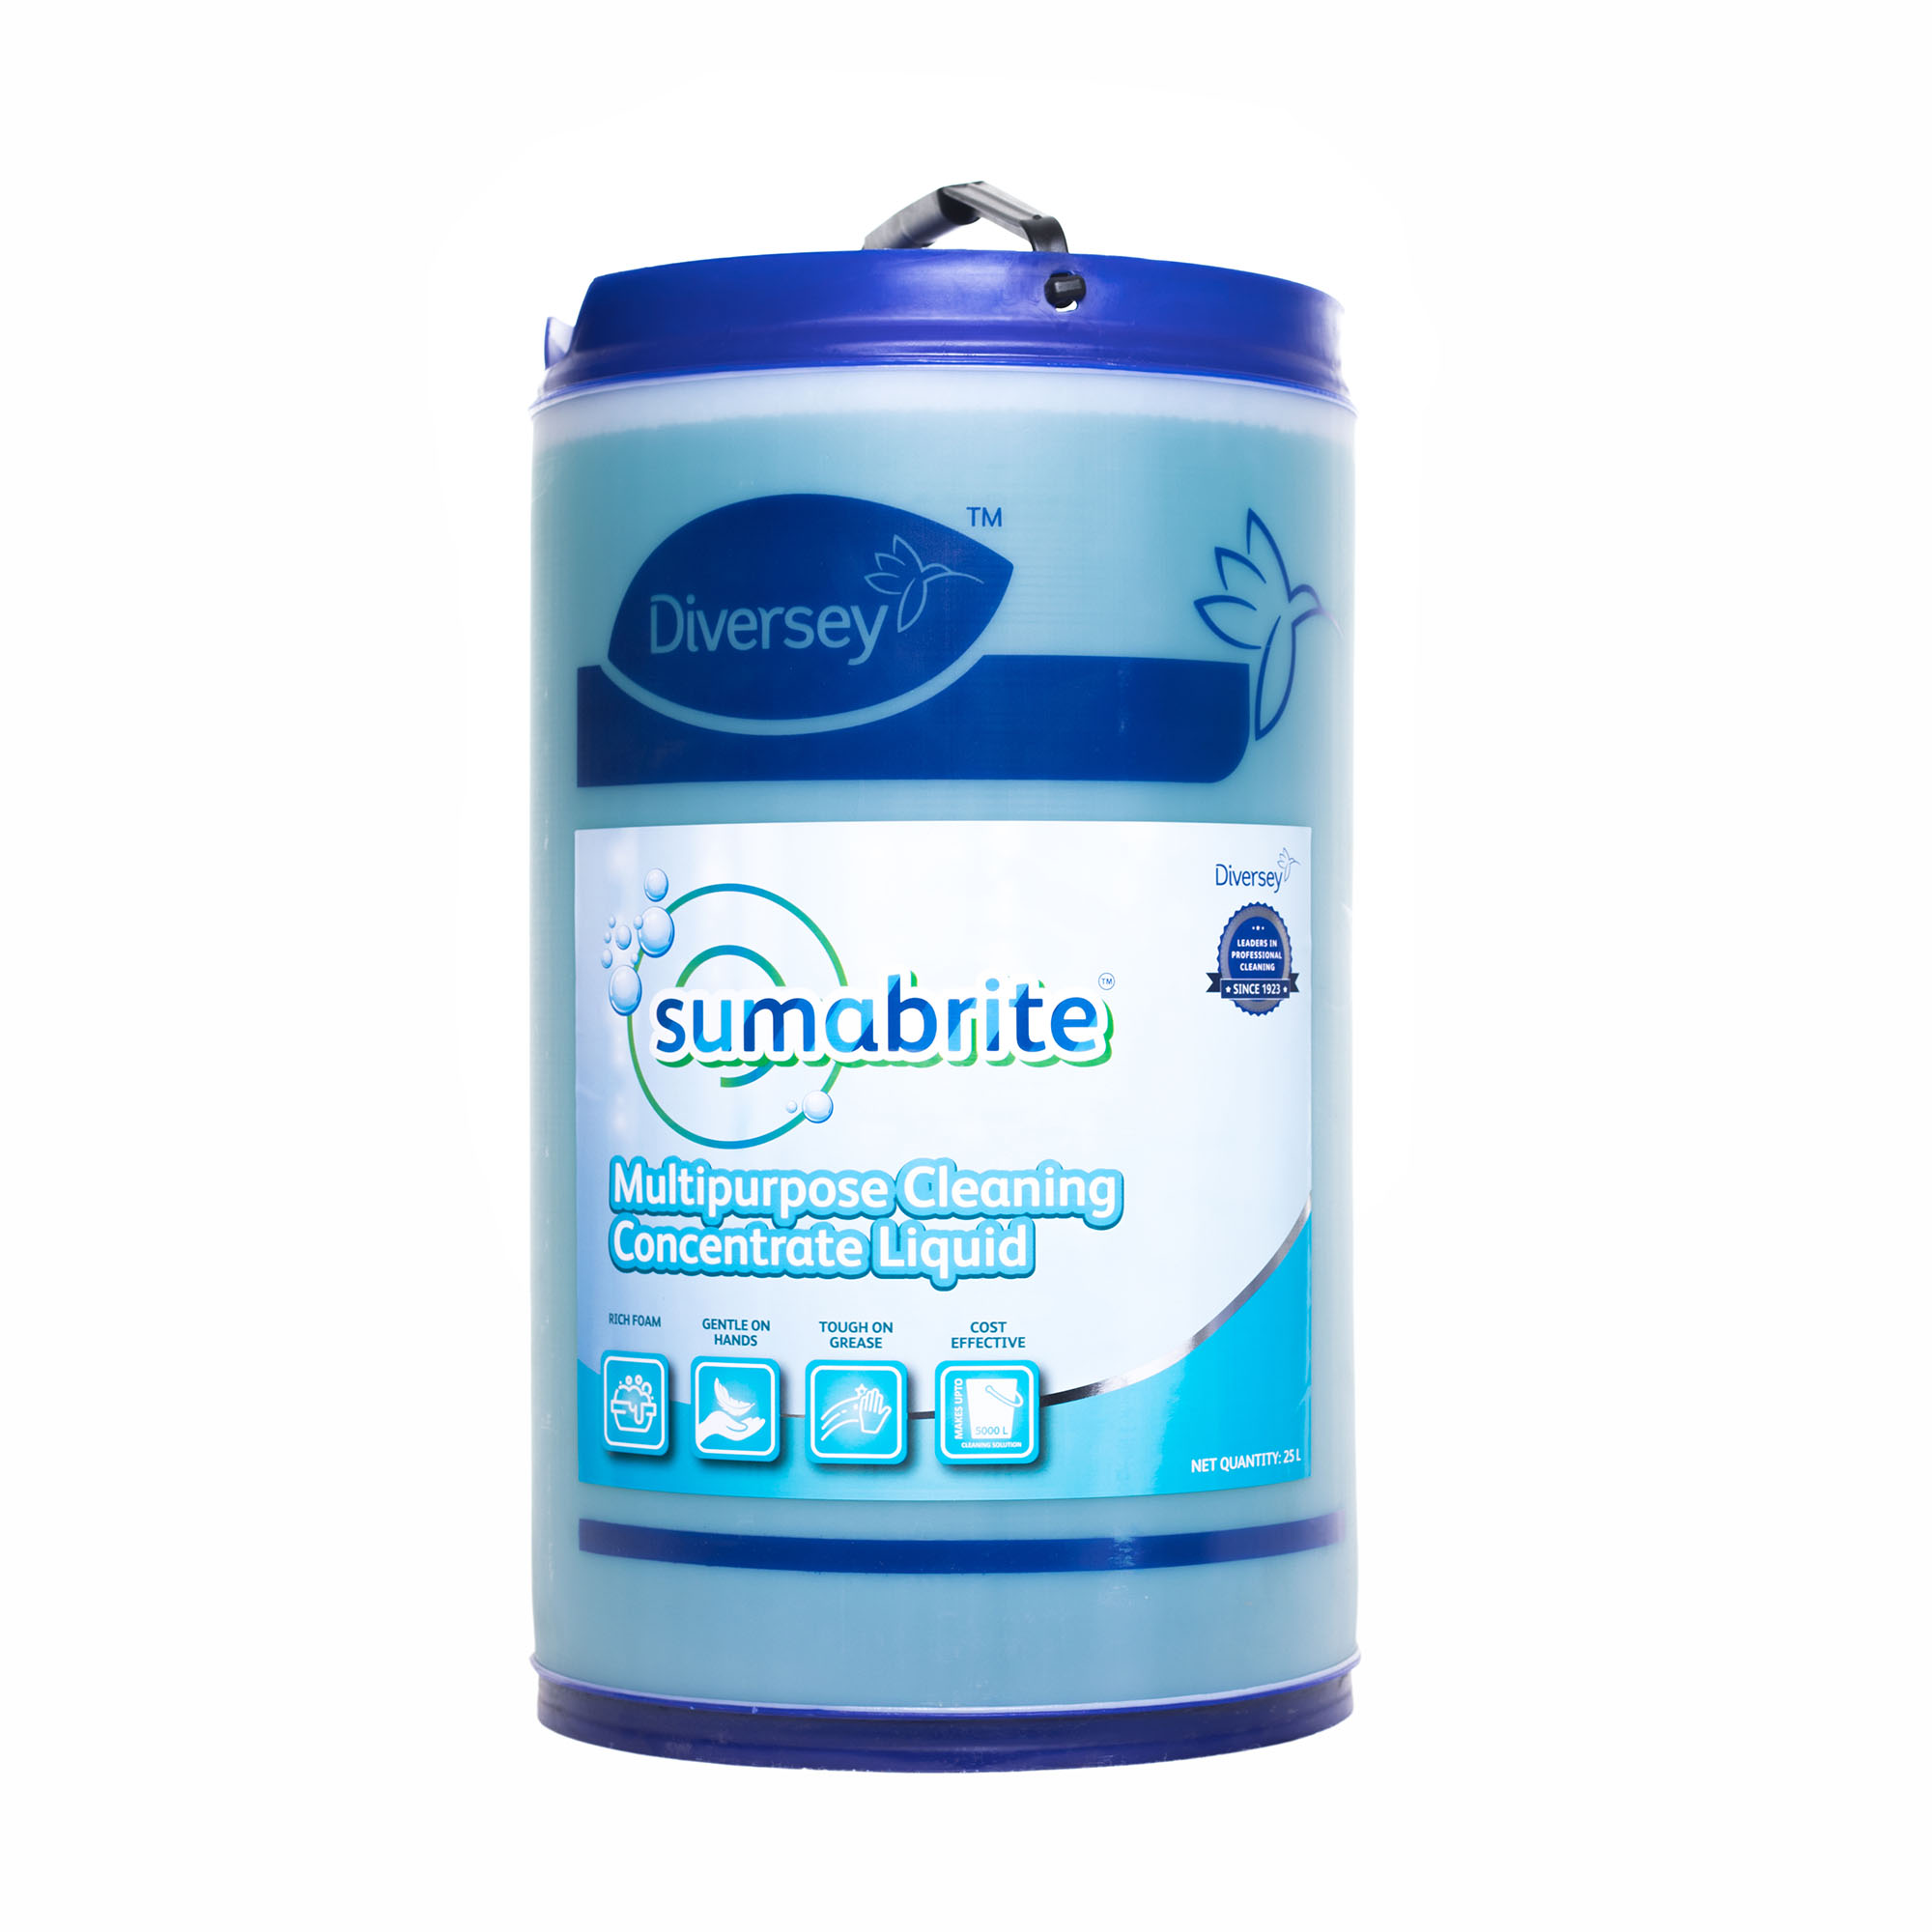 sumabrite%20Mutipurpose%20Cleaning%20concentrate%20Liquid%20%28Front%29.jpg